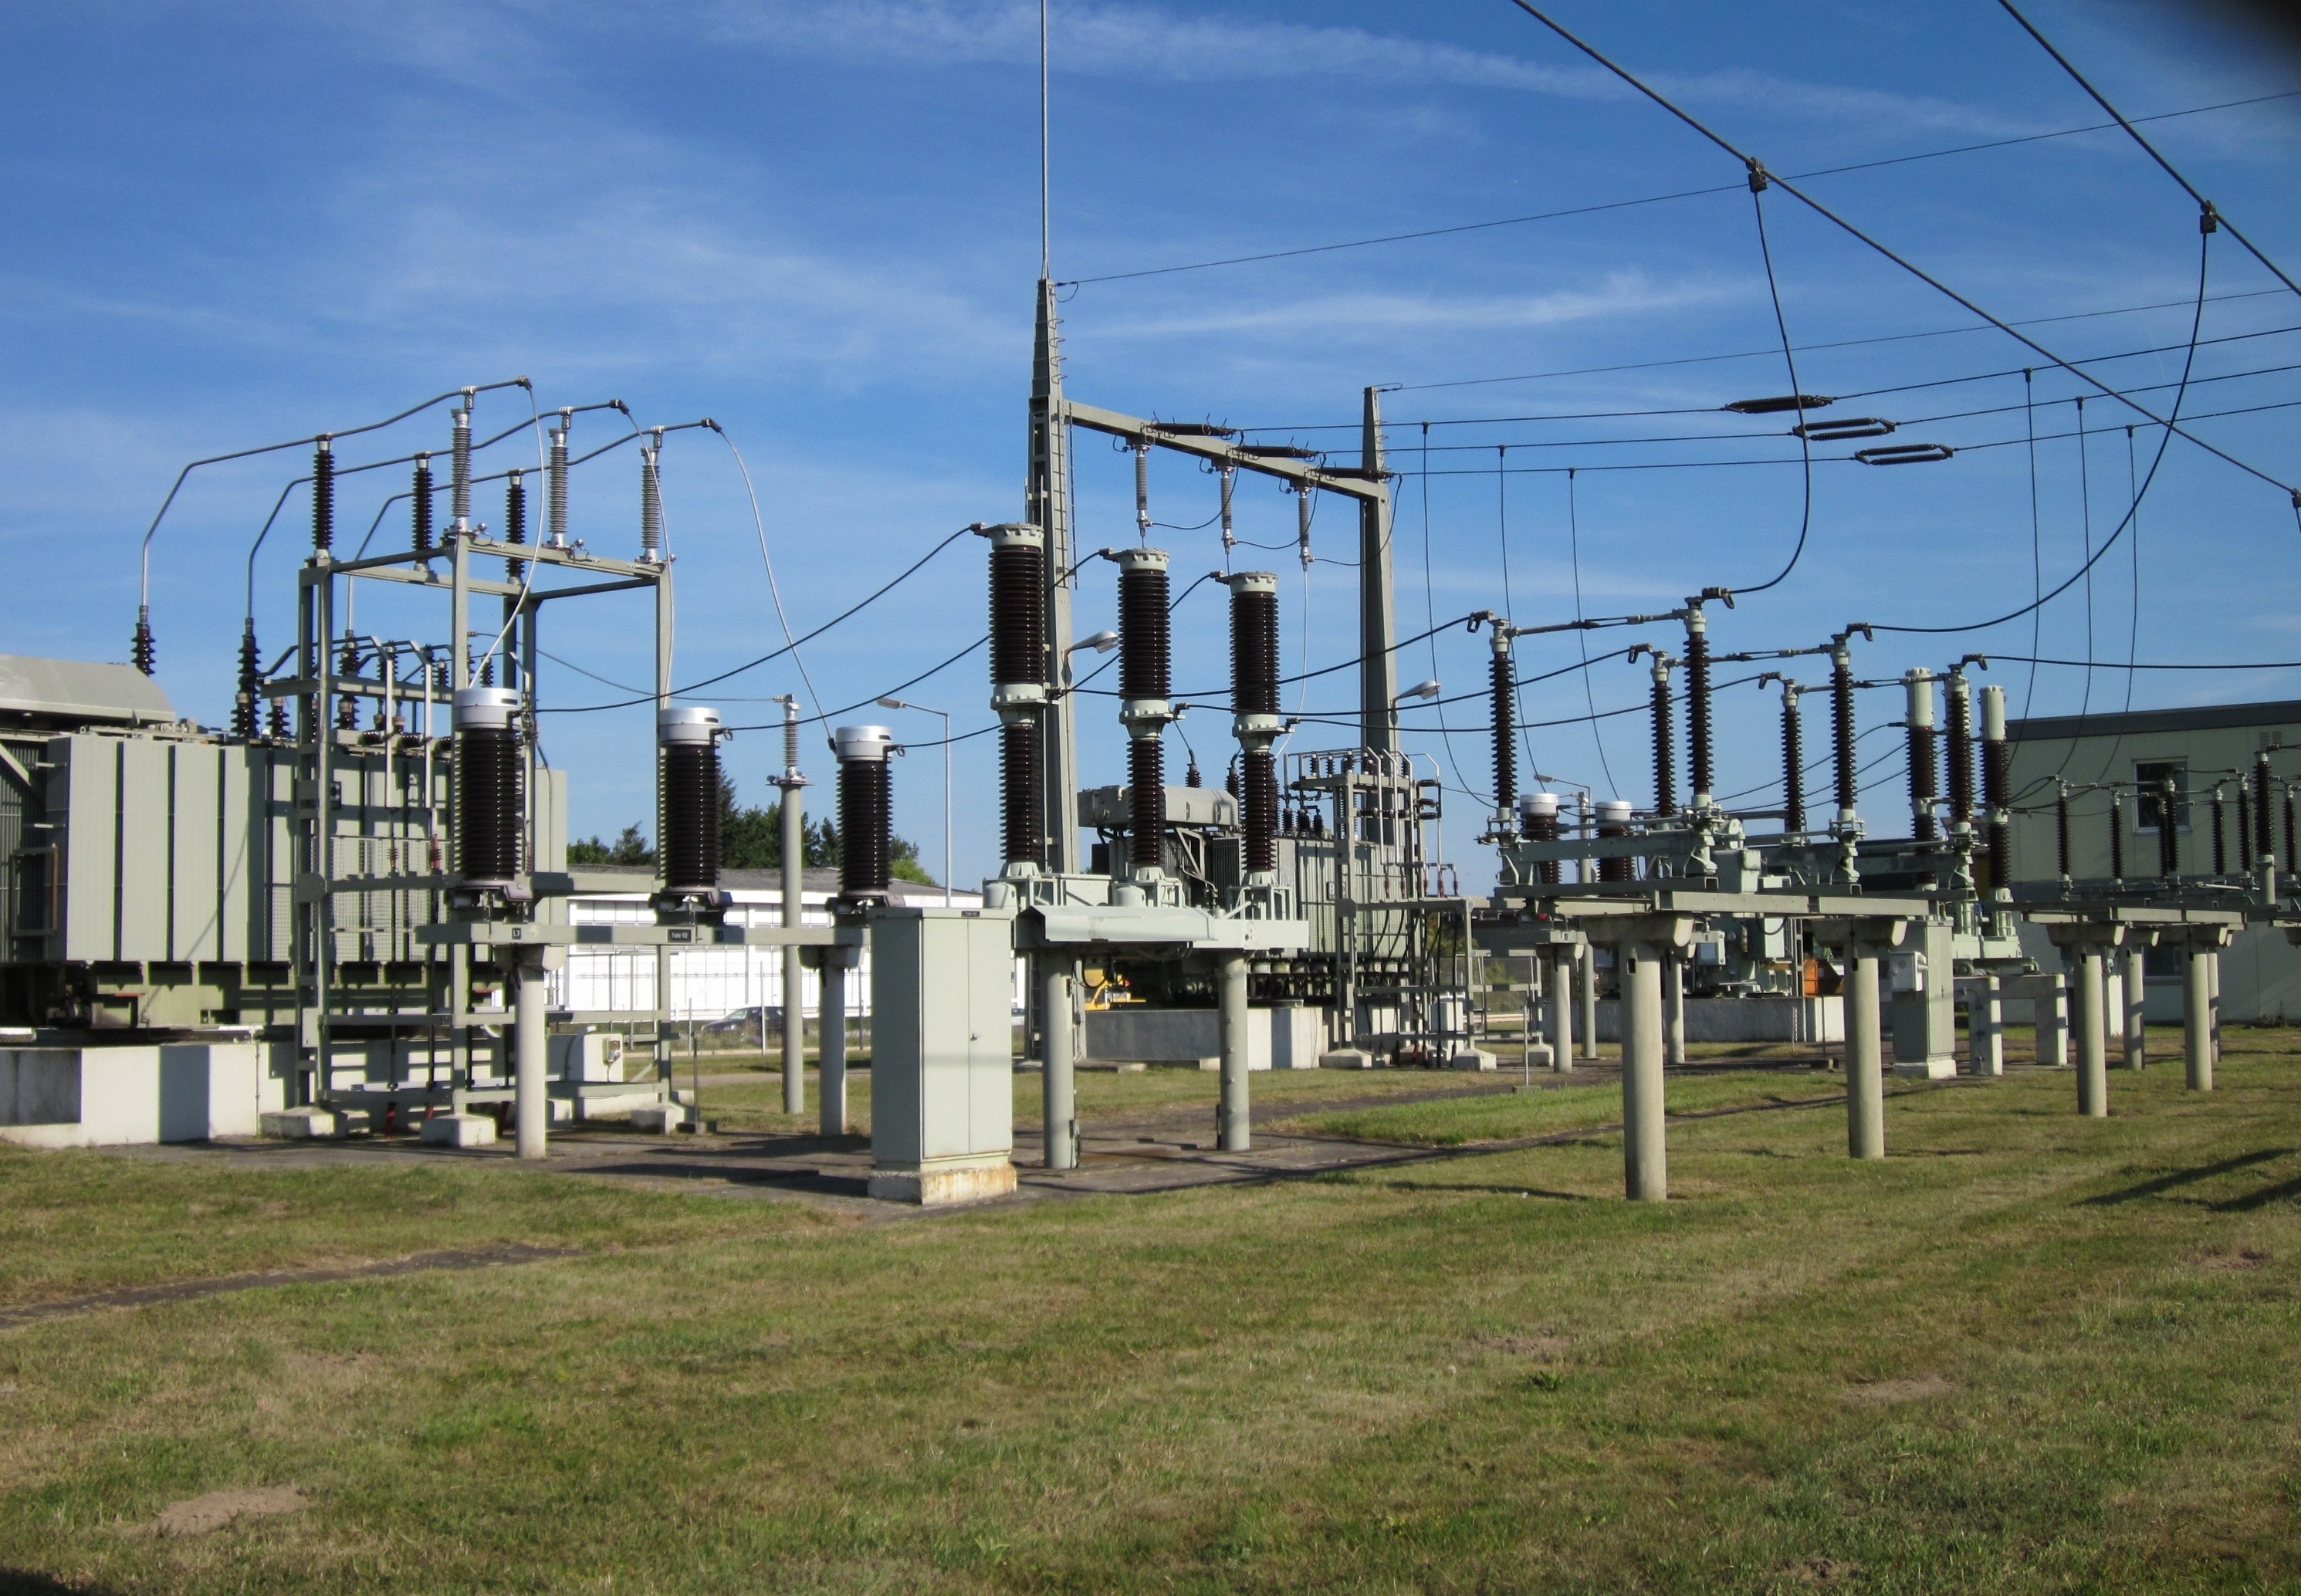 electricity power supply towers